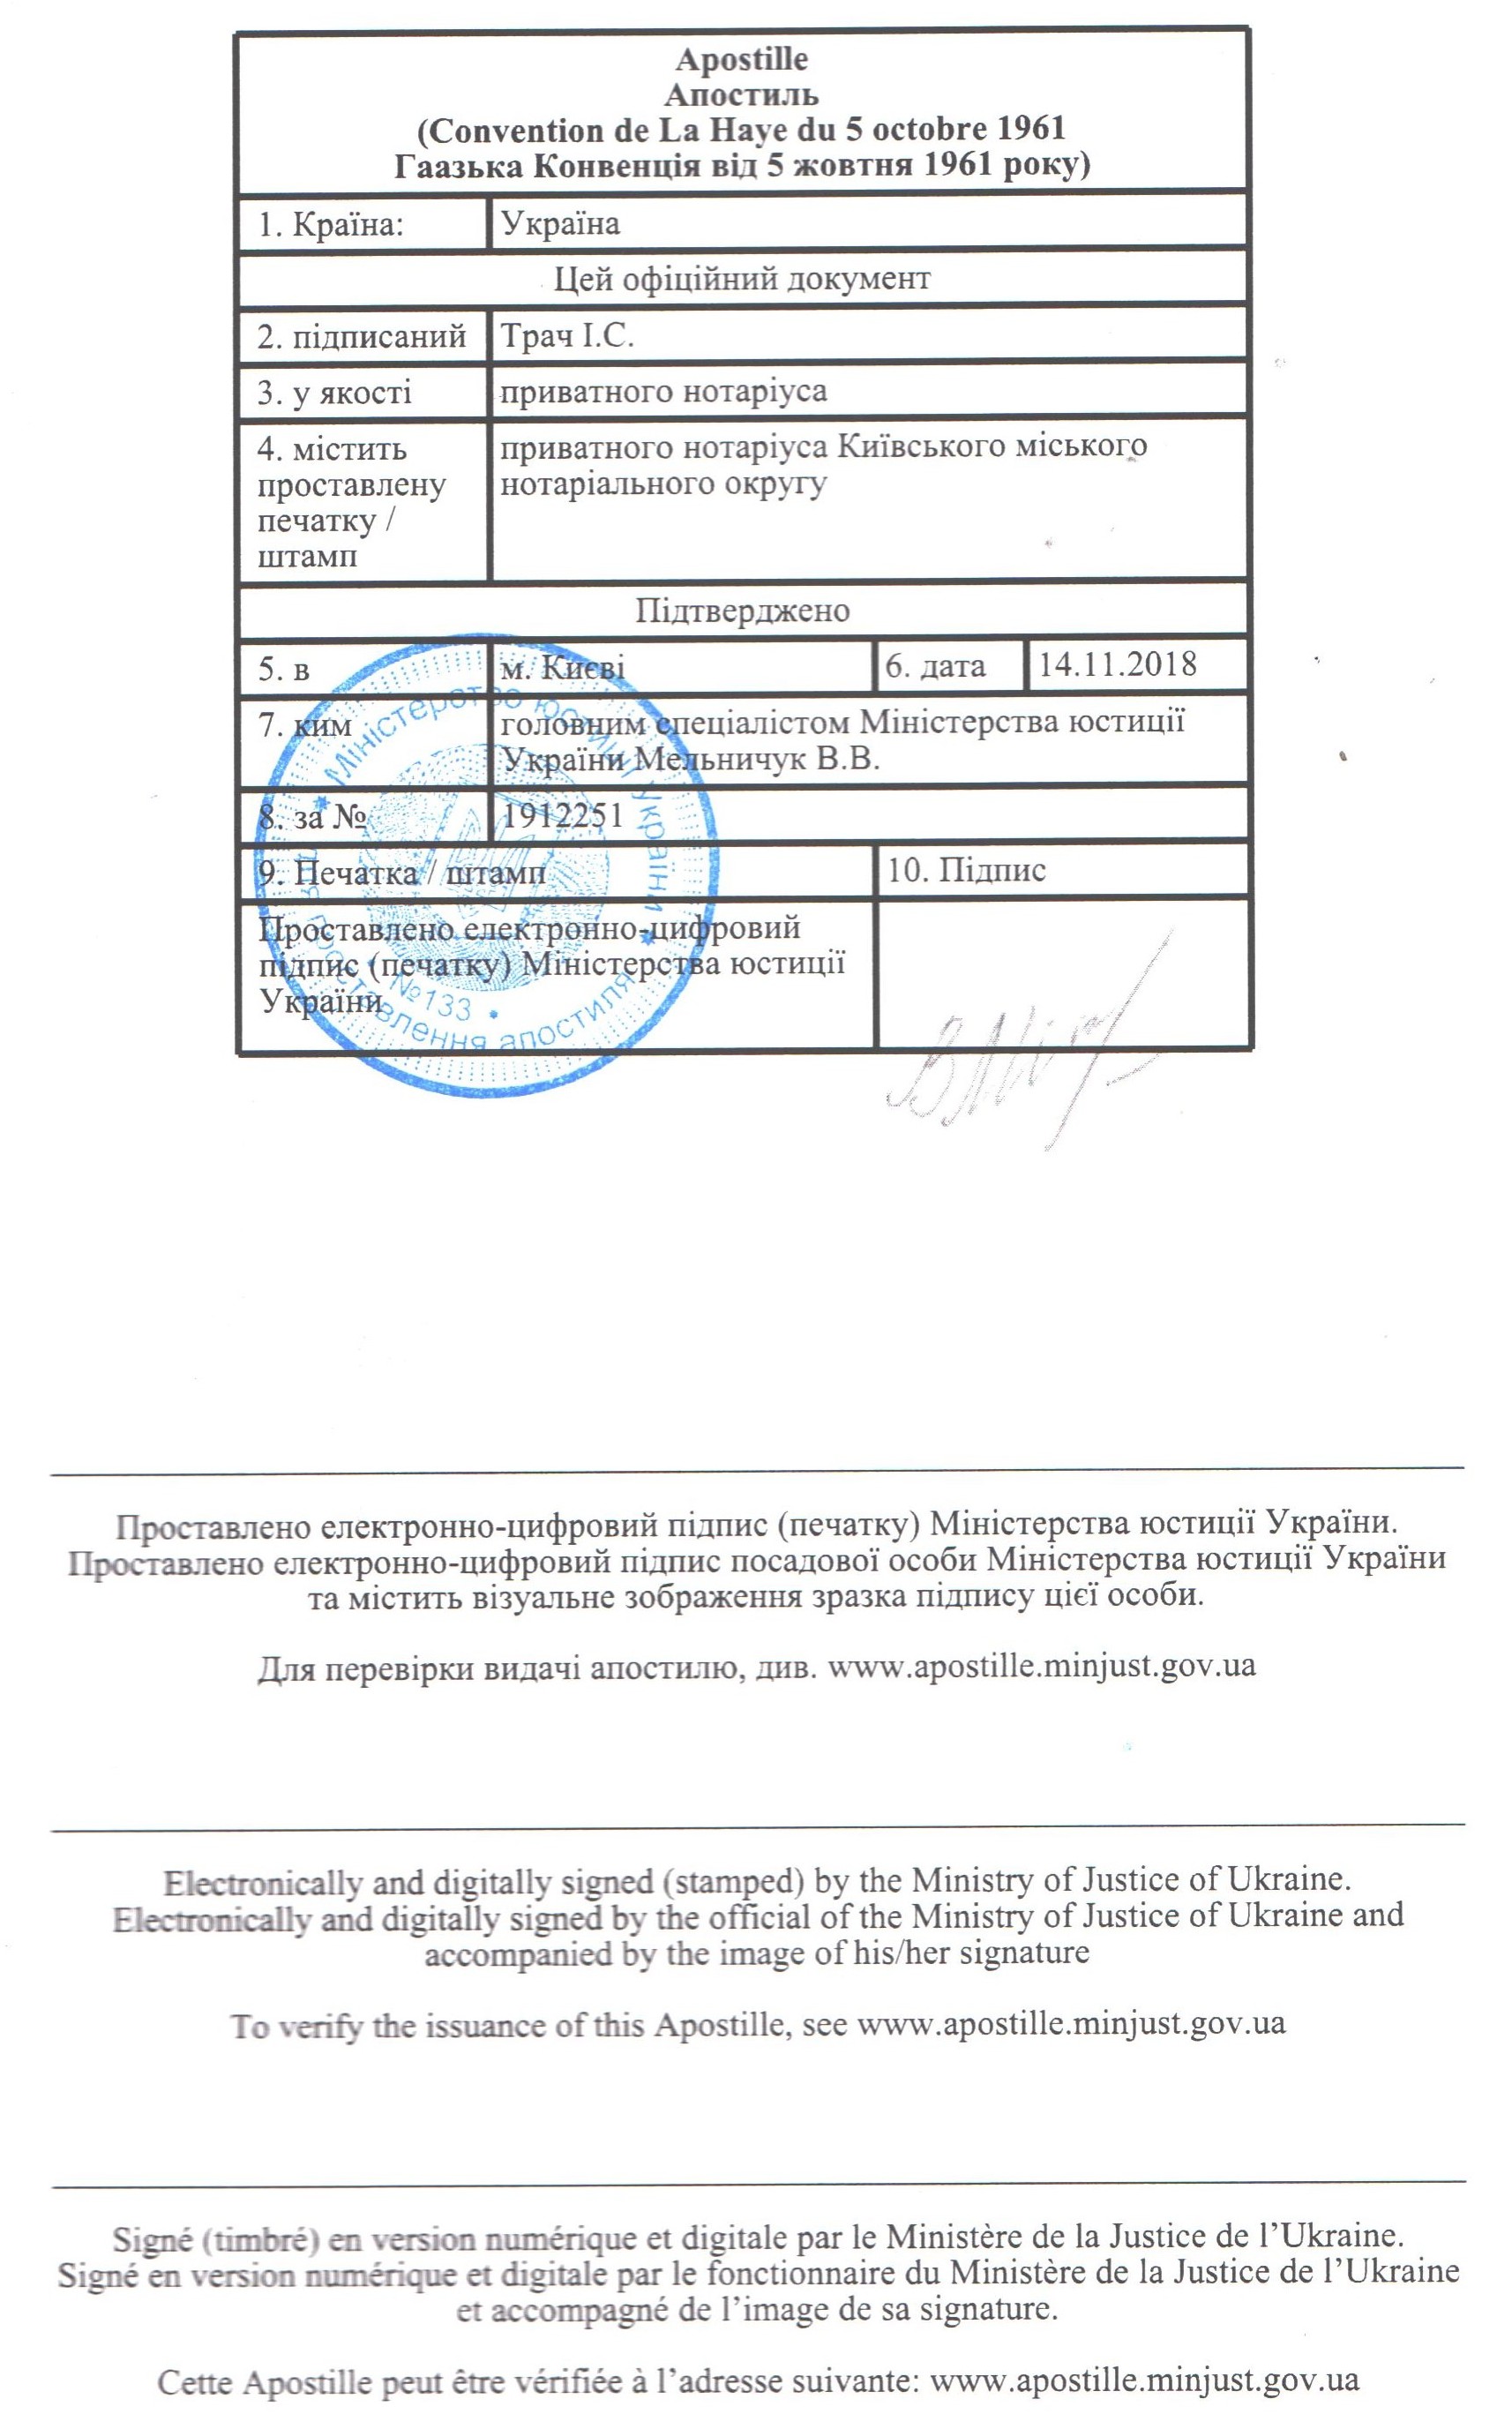 Apostille and legalization of Ministry of Justice of Ukraine